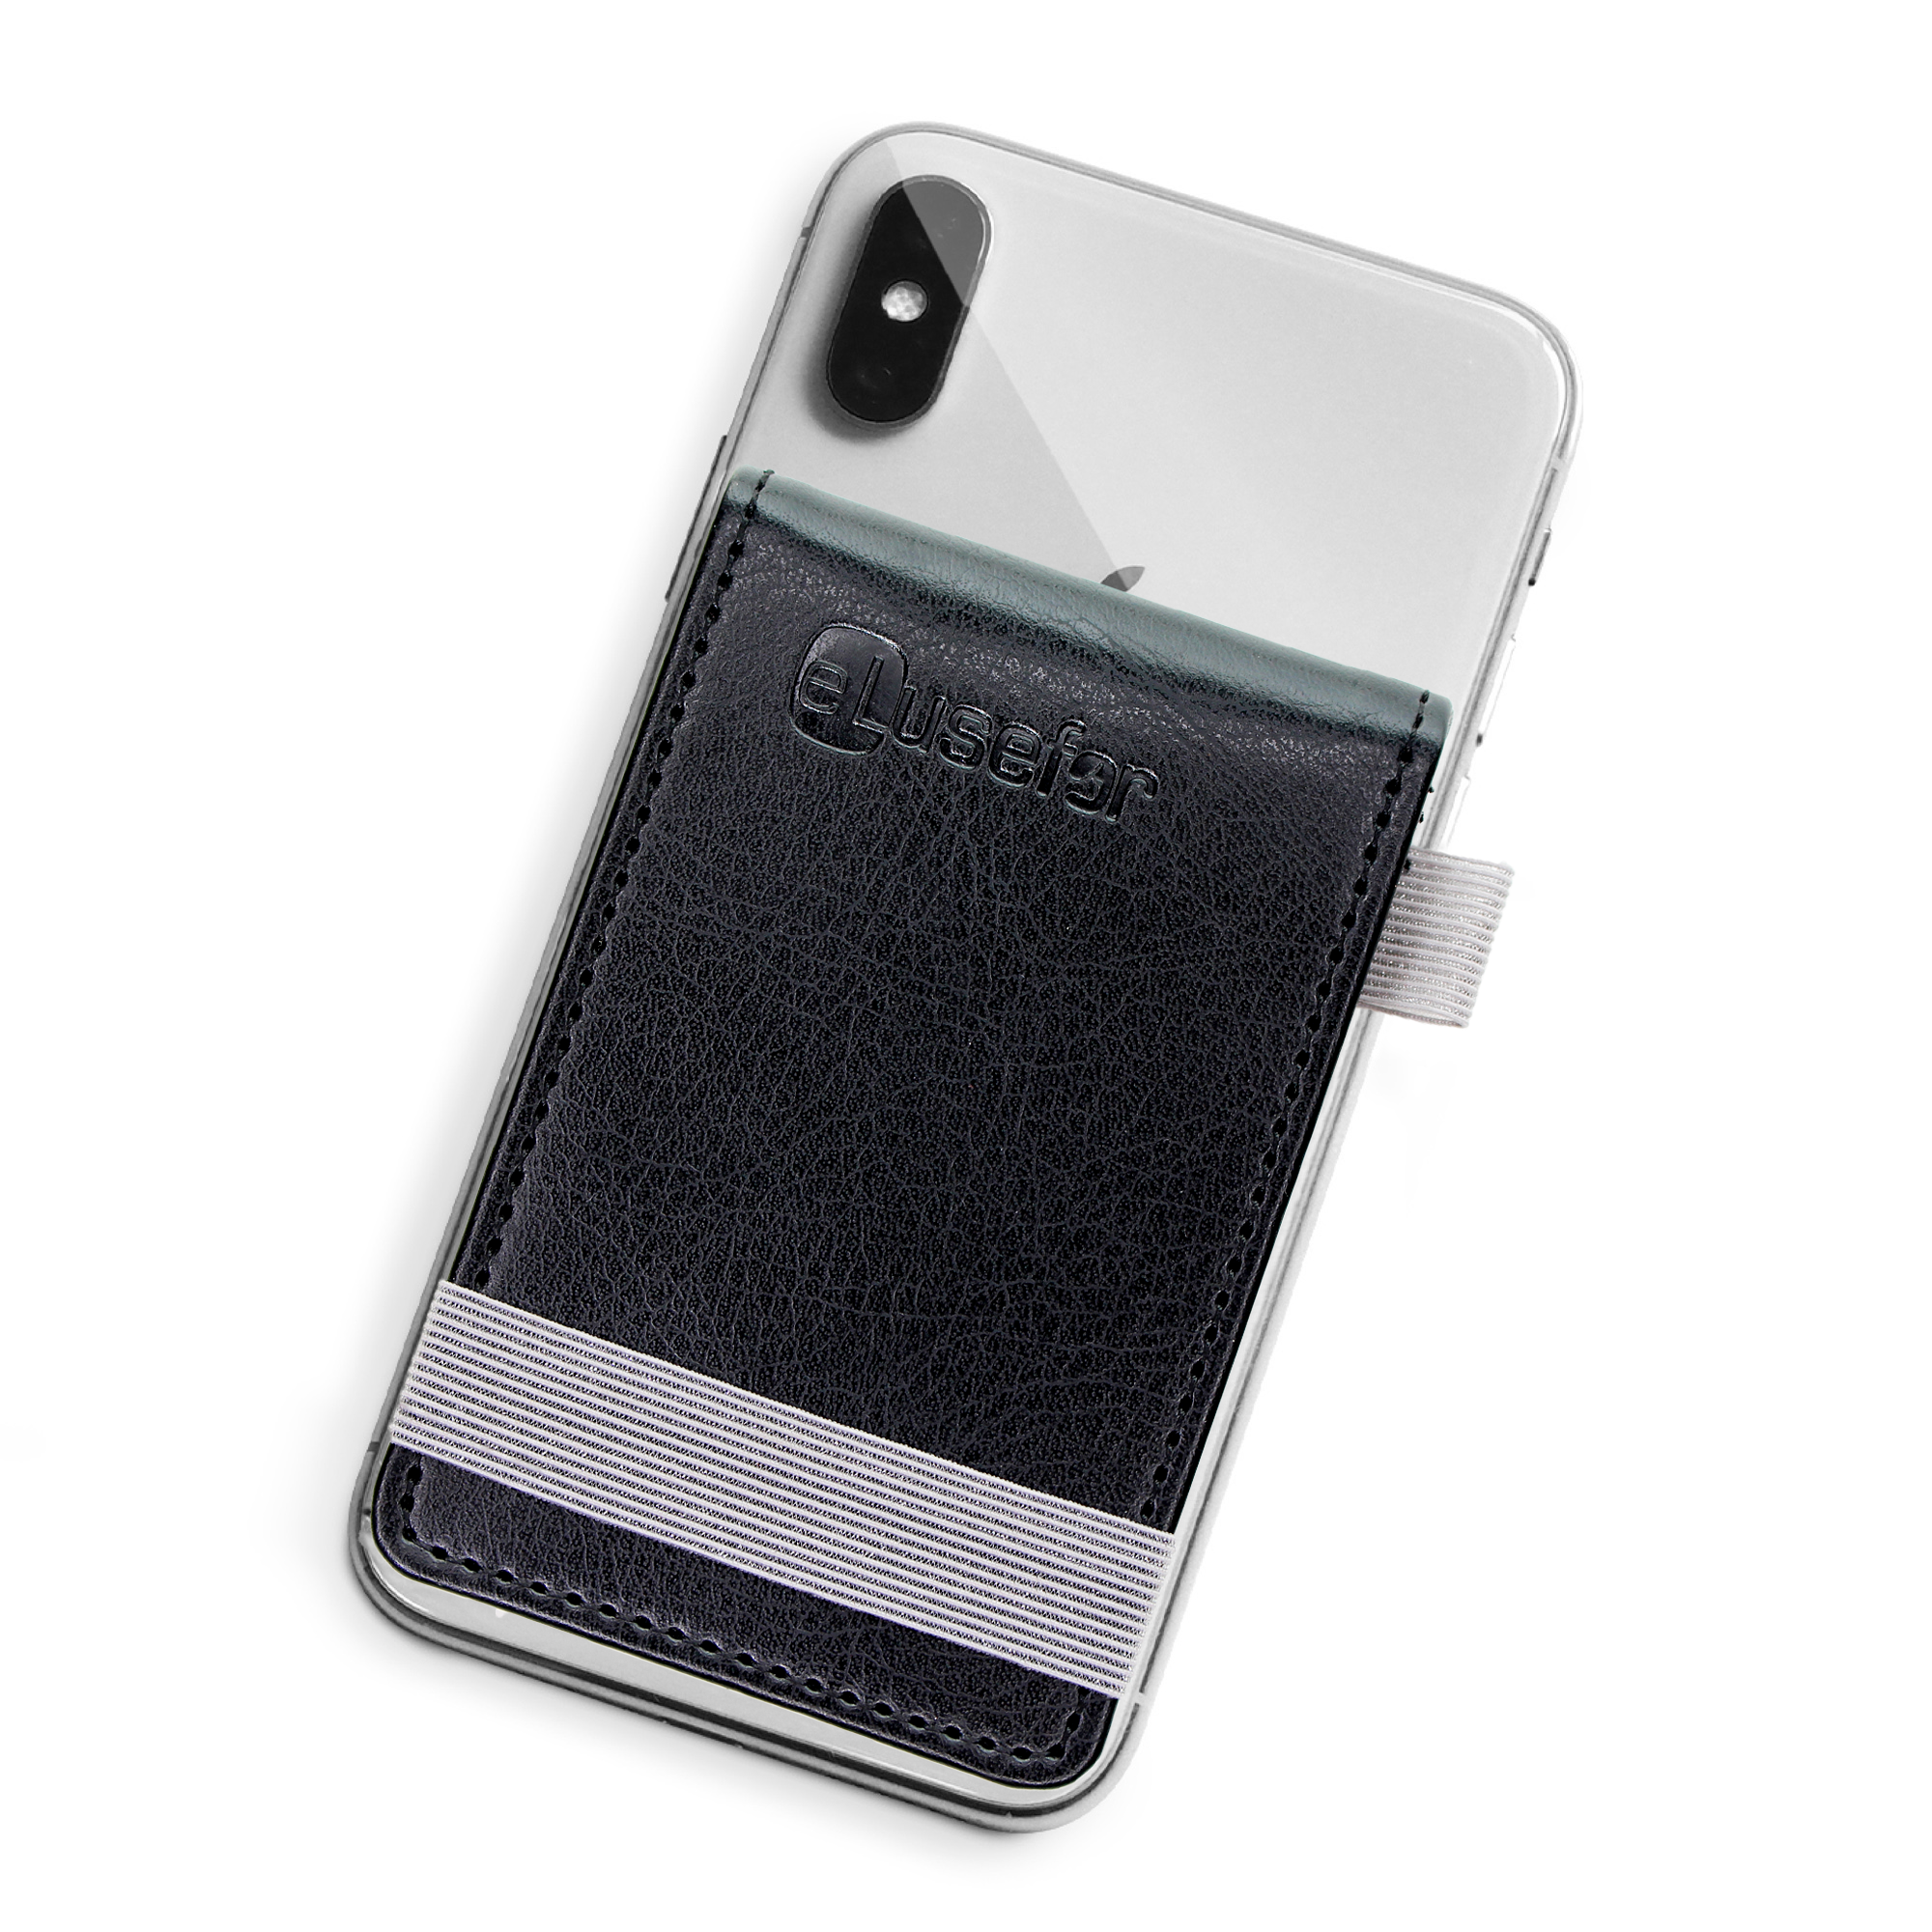 Liam Stick-on Phone Wallet for 6 Cards, Cash, IDs and more